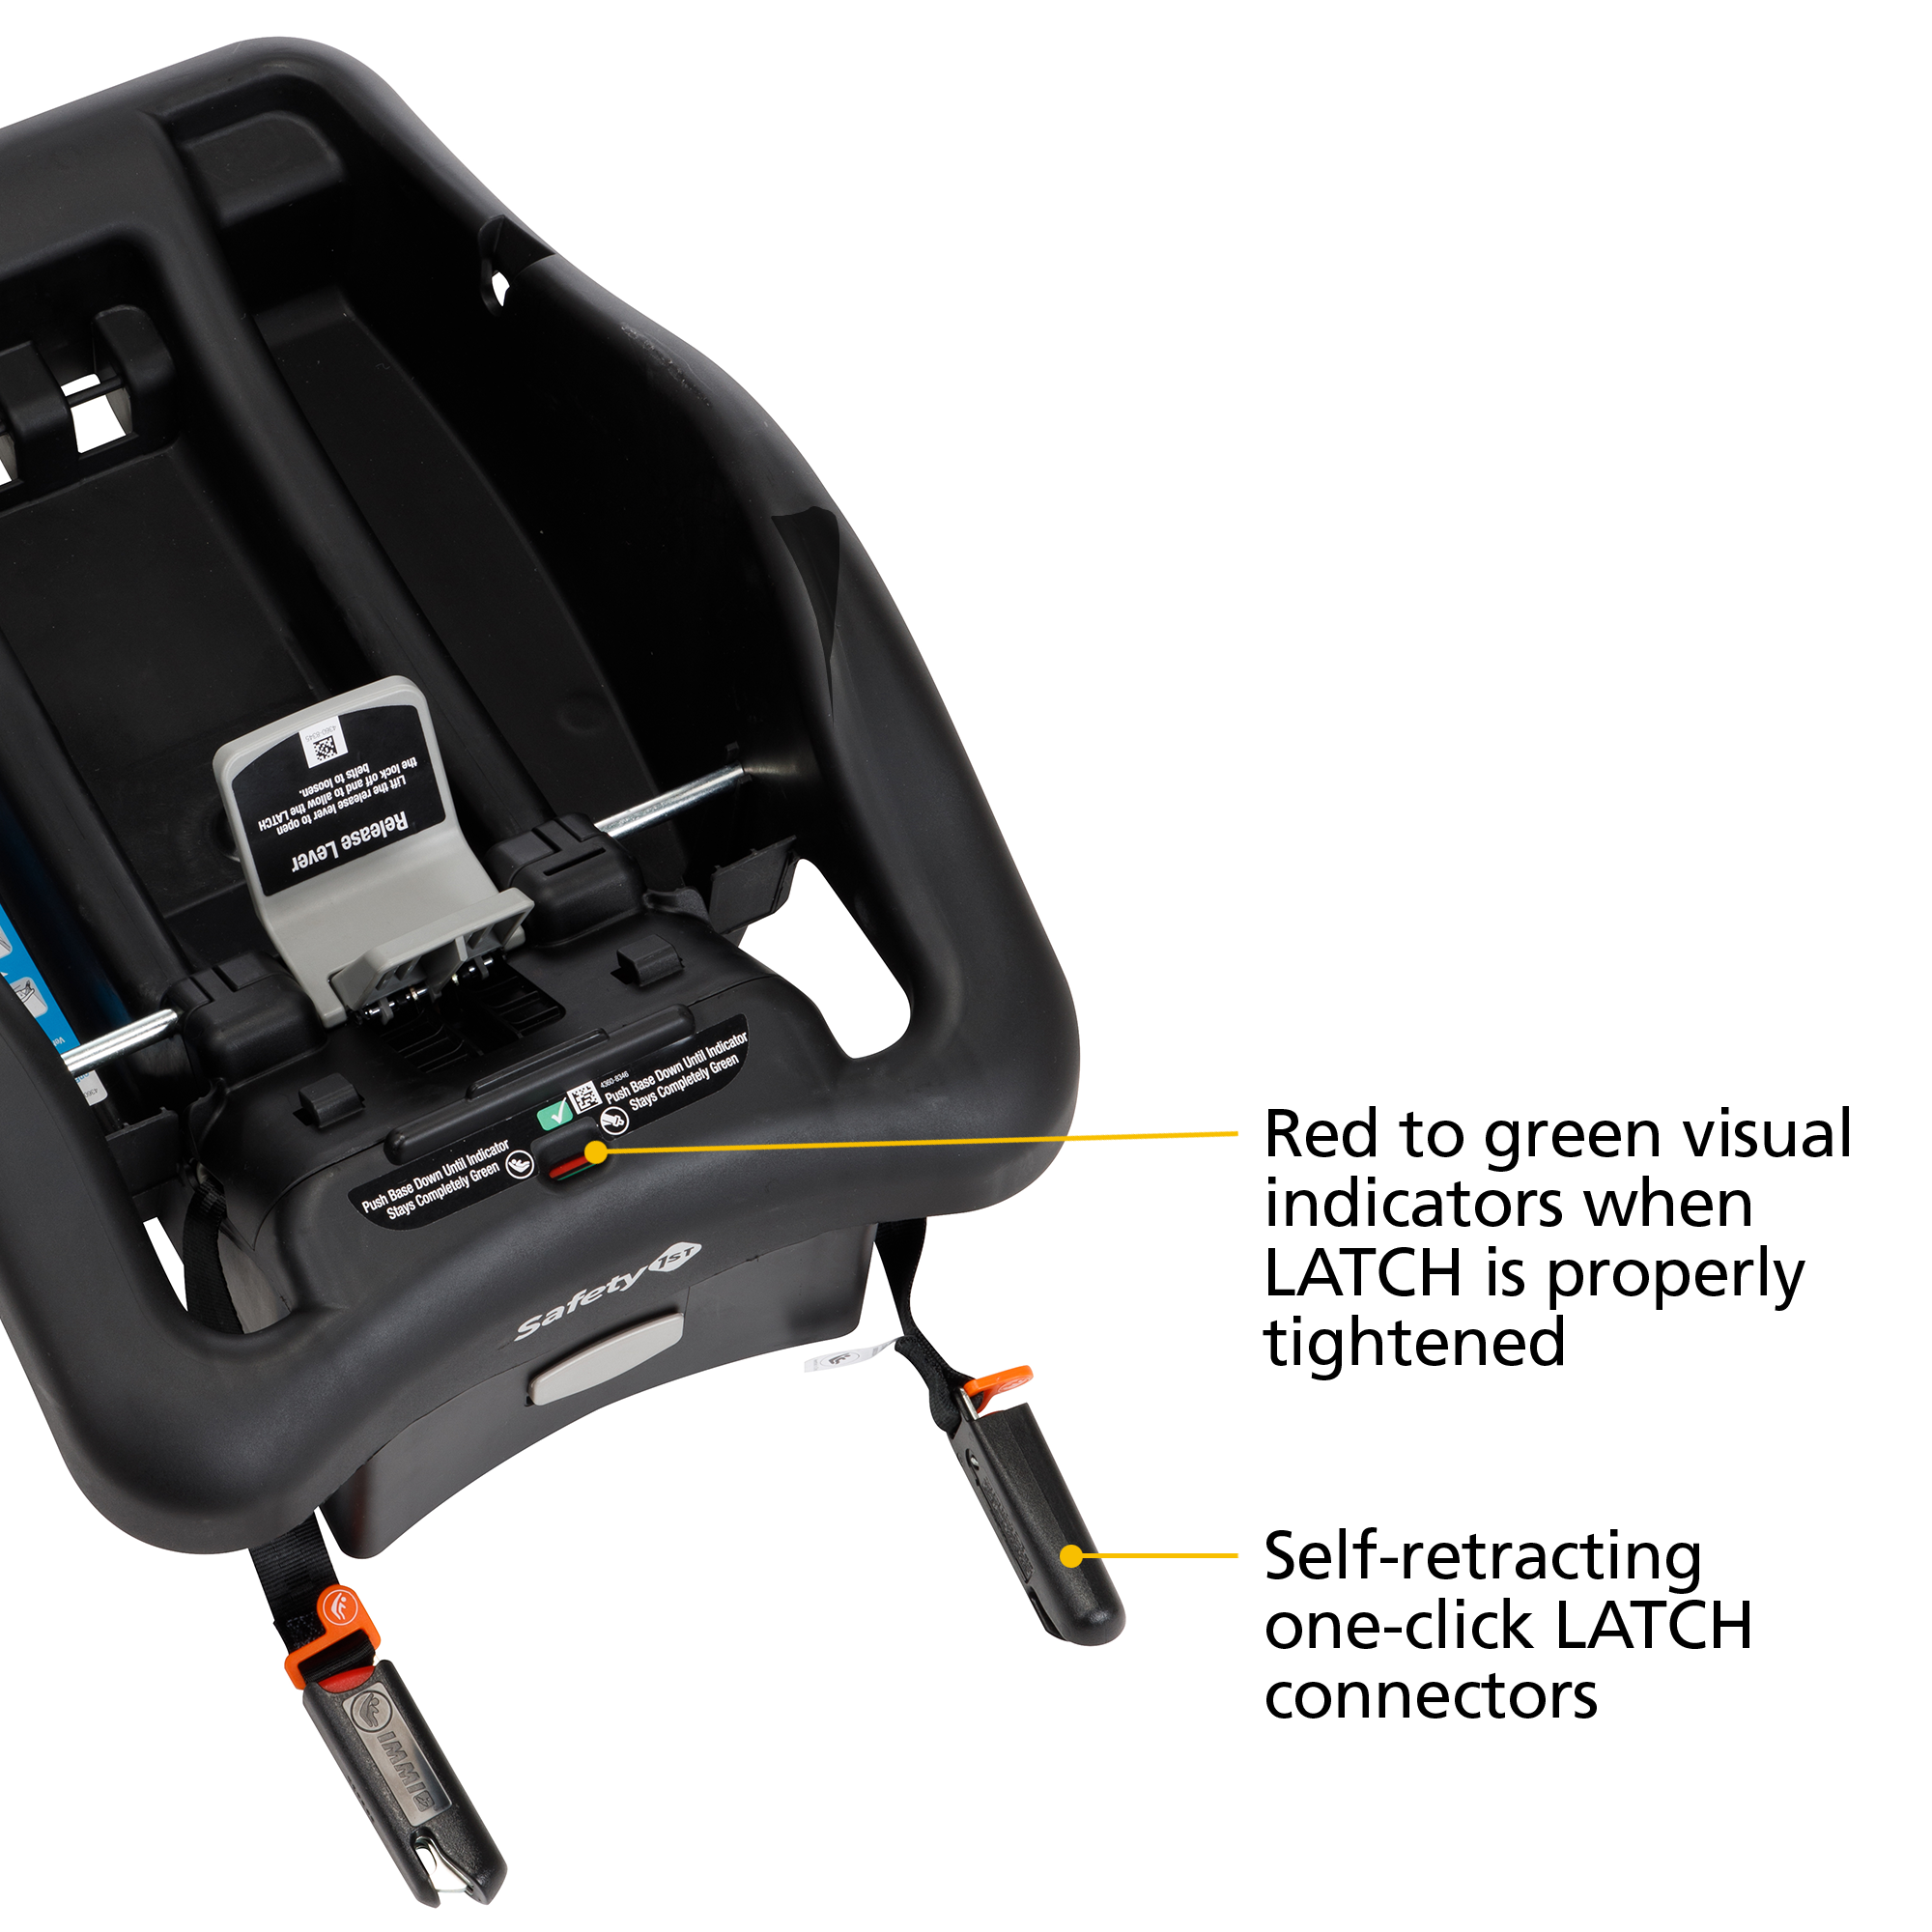 onBoard™35 SecureTech™ Infant Car Seat - red to green visual indicators when LATCH is properly tightened - self-retracting one-click LATCH connectors